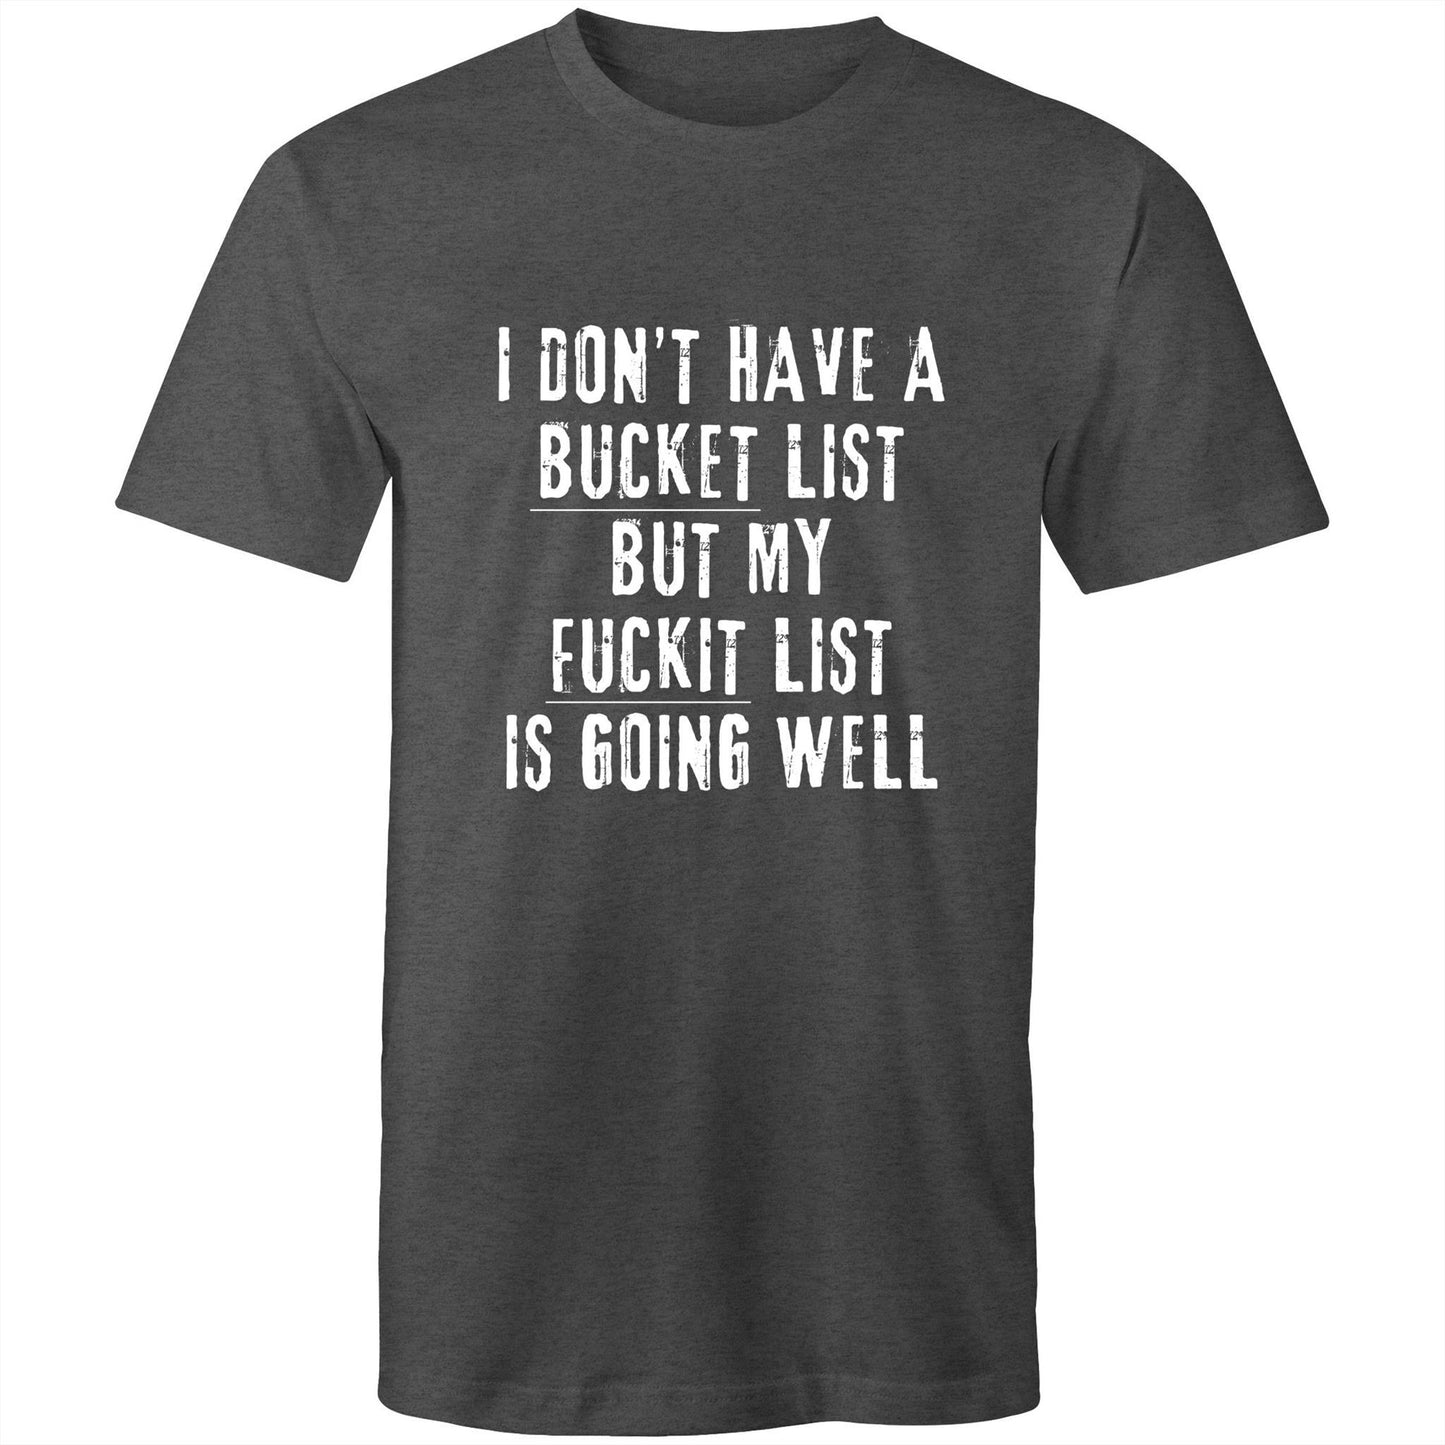 I Don't Have a Bucket List - Mens T-Shirt